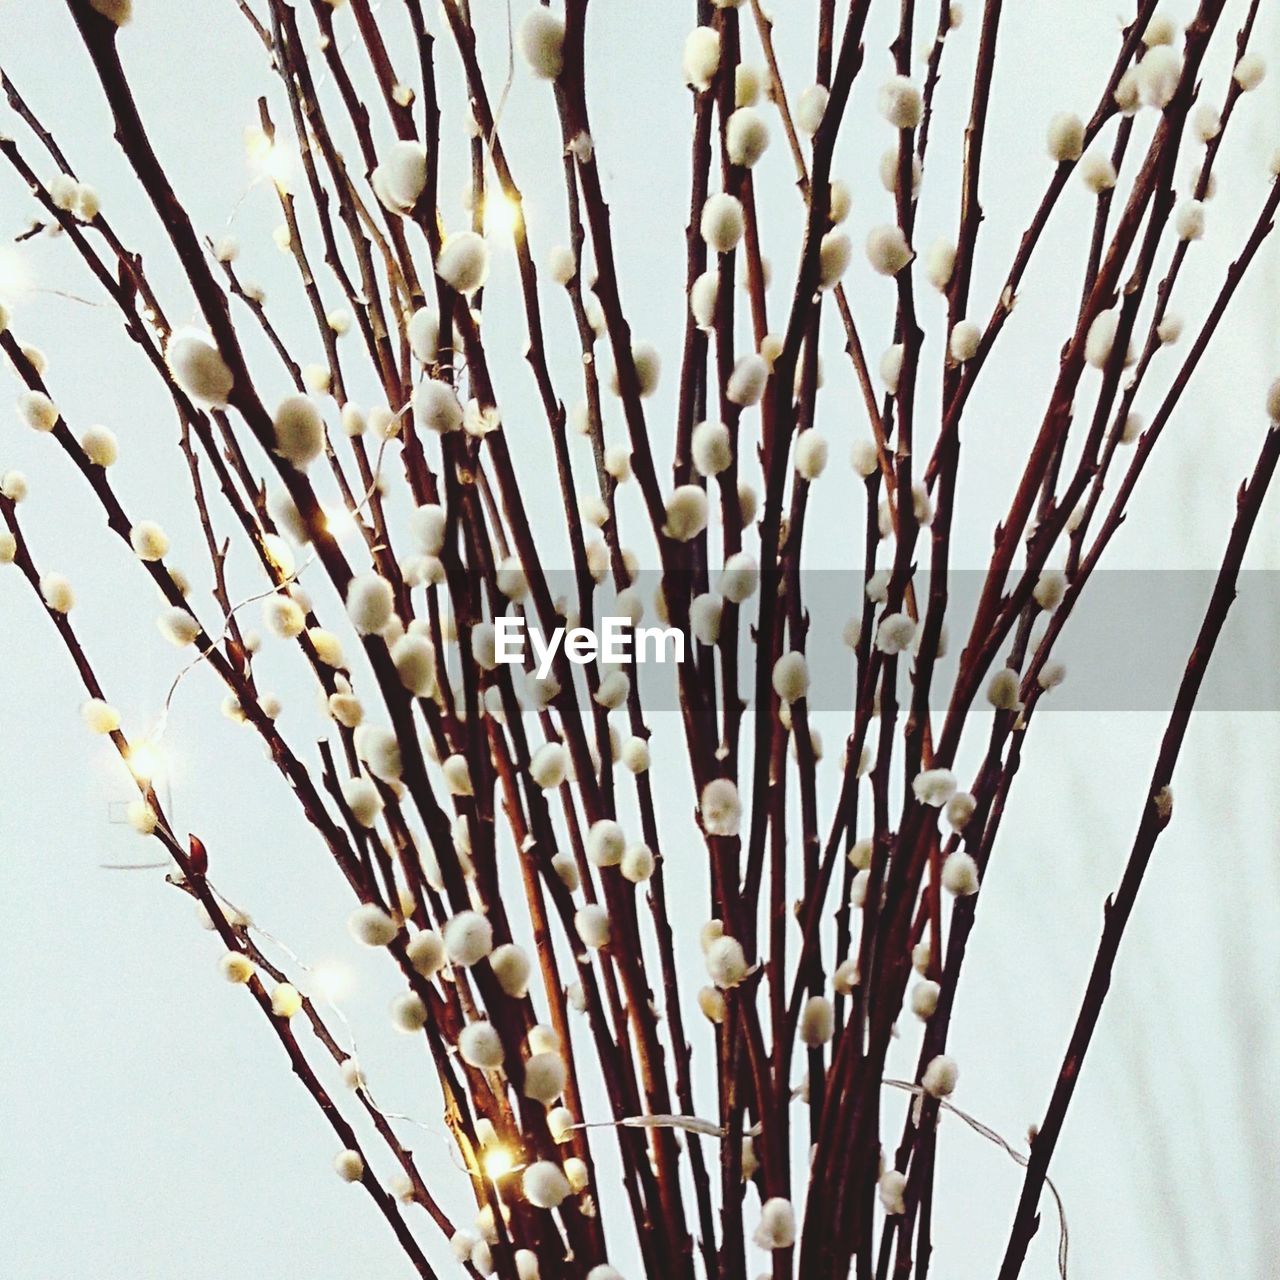 Decorative twigs against white background